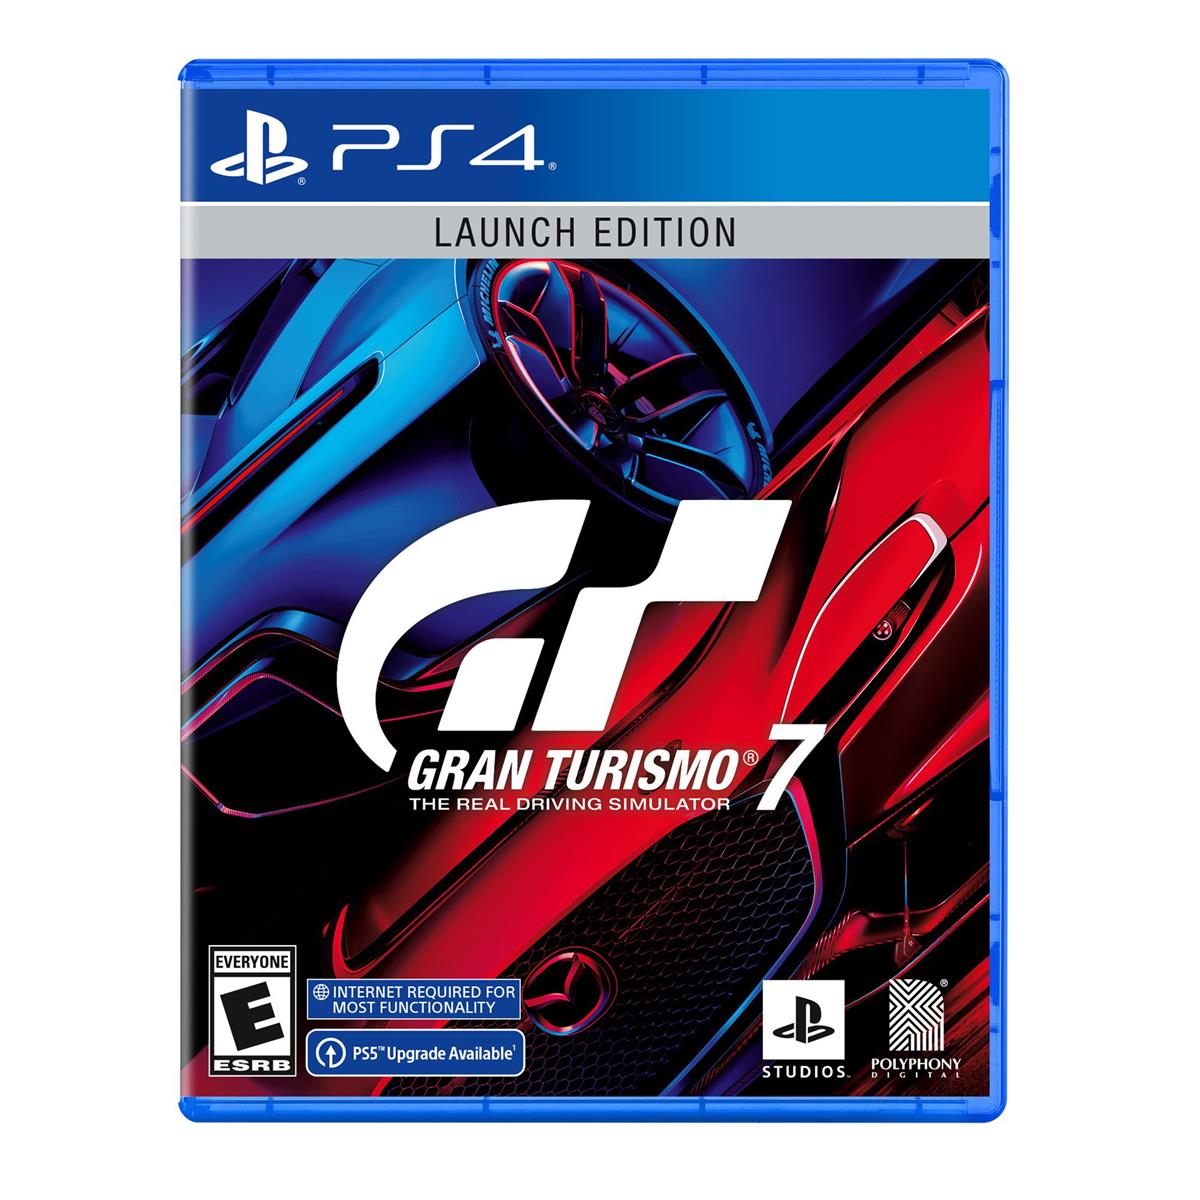 Image of Sony Gran Turismo 7 Launch Edition for PlayStation 4